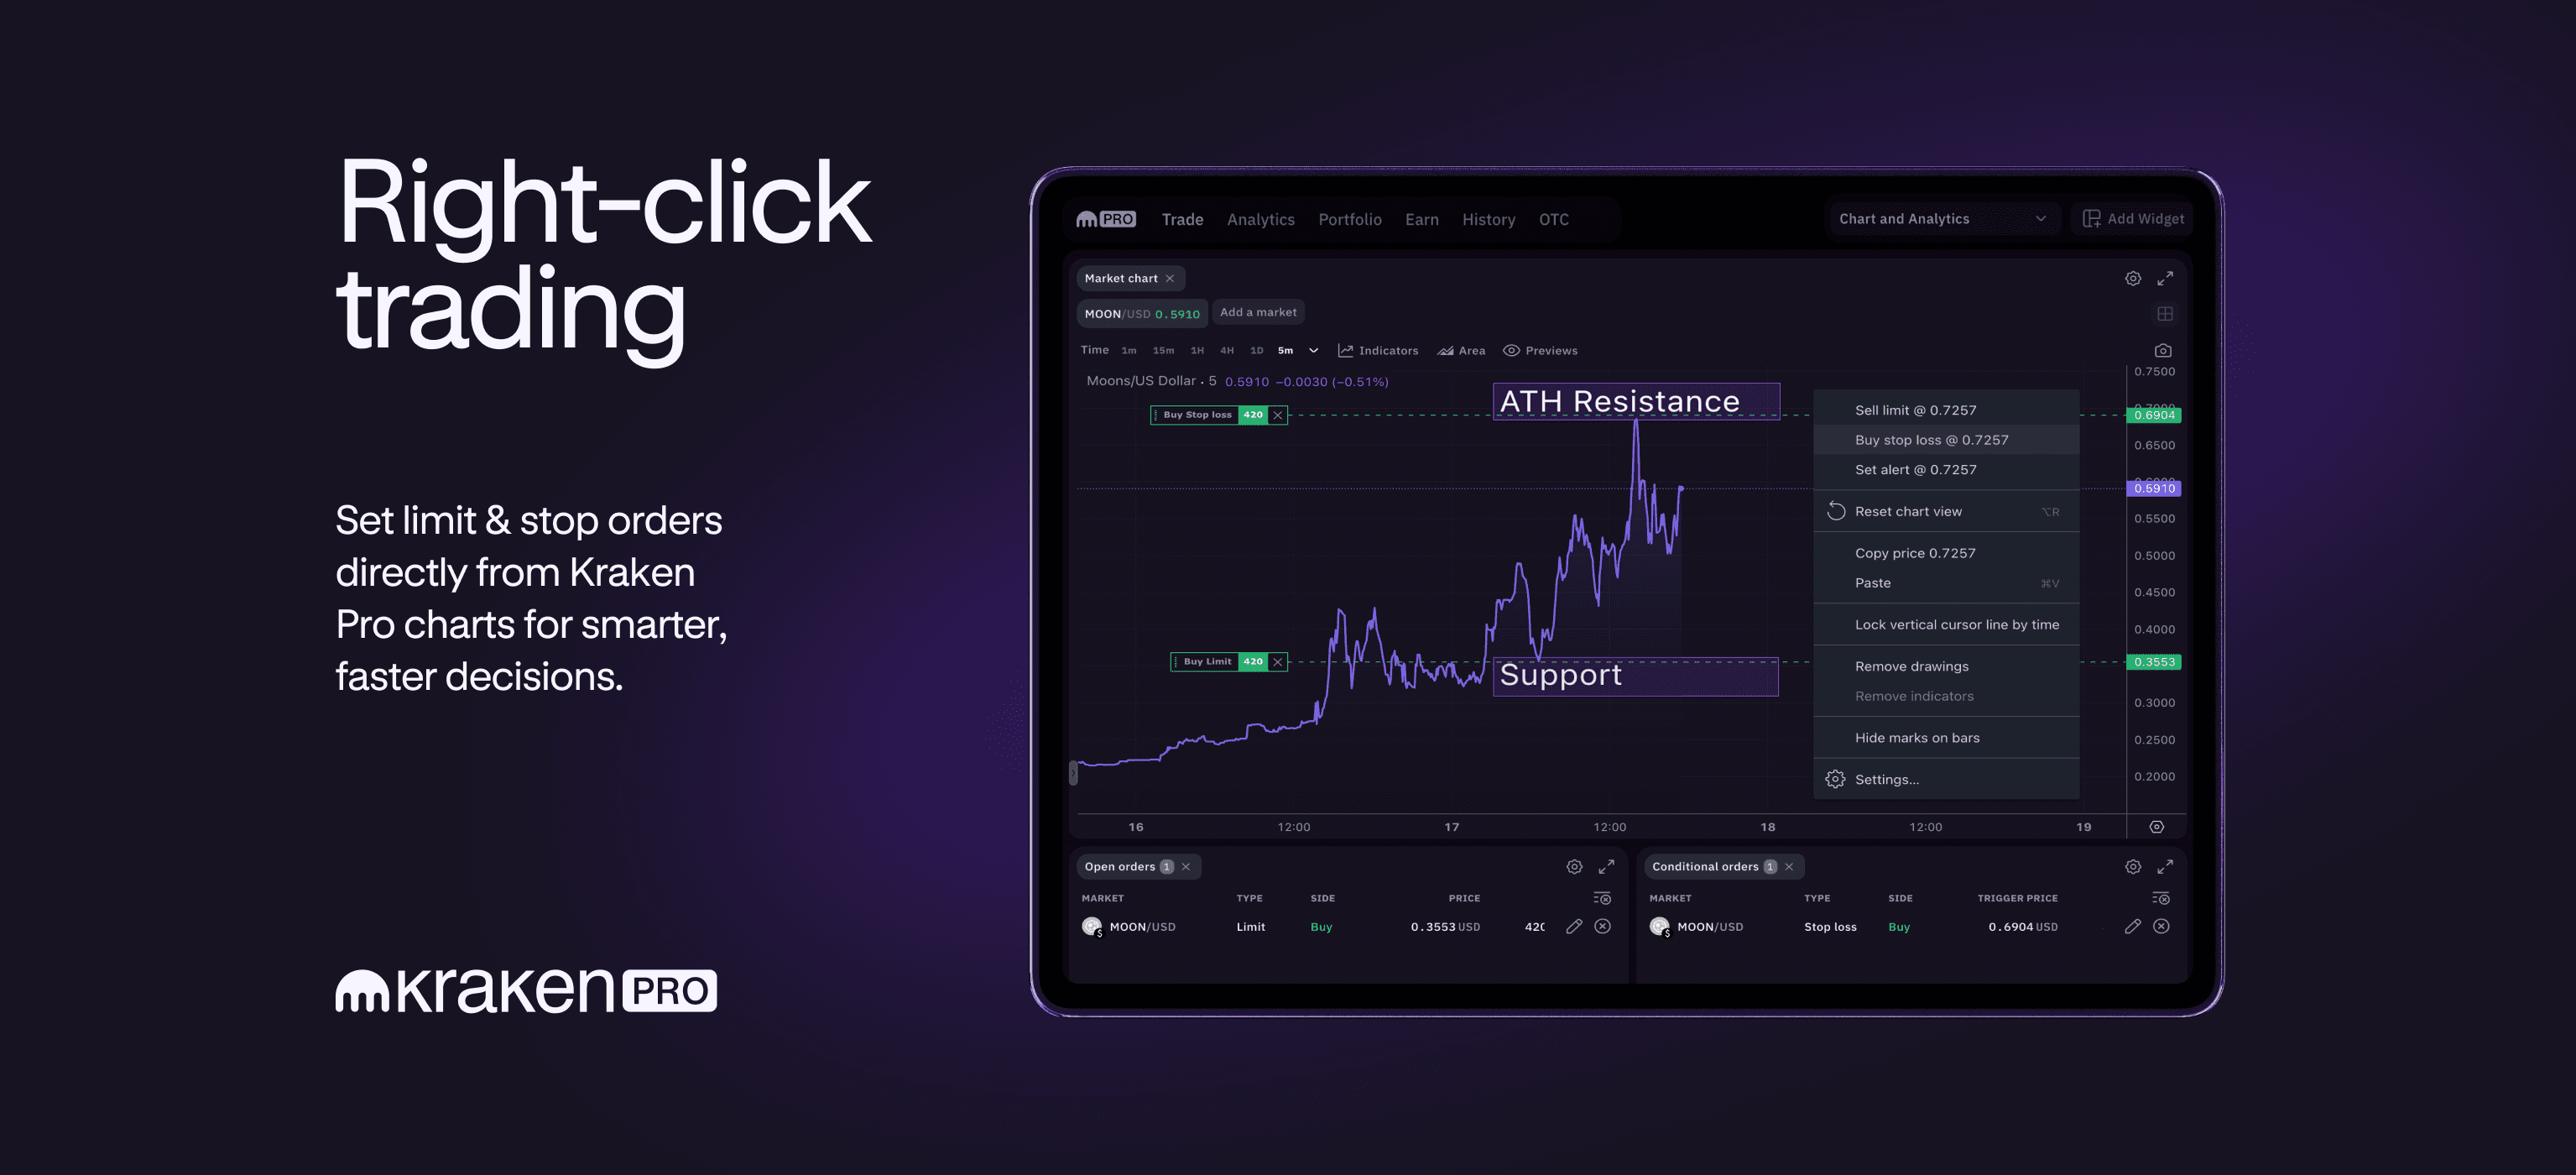 Introducing right-click trading: Place limit and stop orders directly from price charts